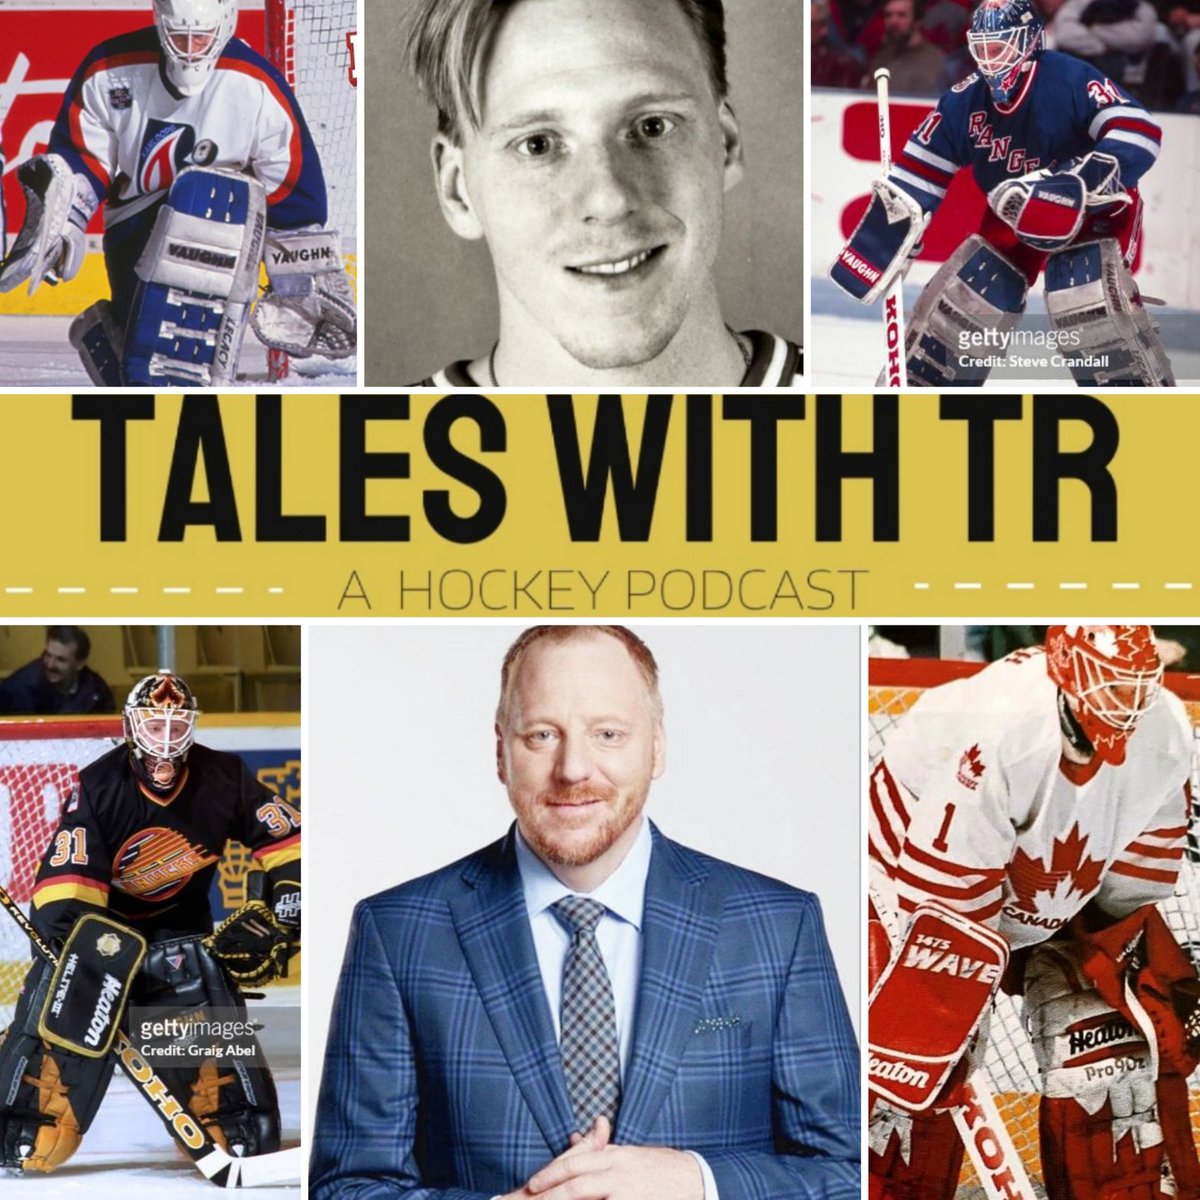 #TaleswithTR Episode 172 B up now; this wk I welcome respected author, coach, hockey analyst, public speaker, podcaster, father, Olympic silver medalist and former NHL backstop @CoreyHirsch What a story! Thx again brutha 🤘 Spotify: spotify.link/8QMAWL4zzDb